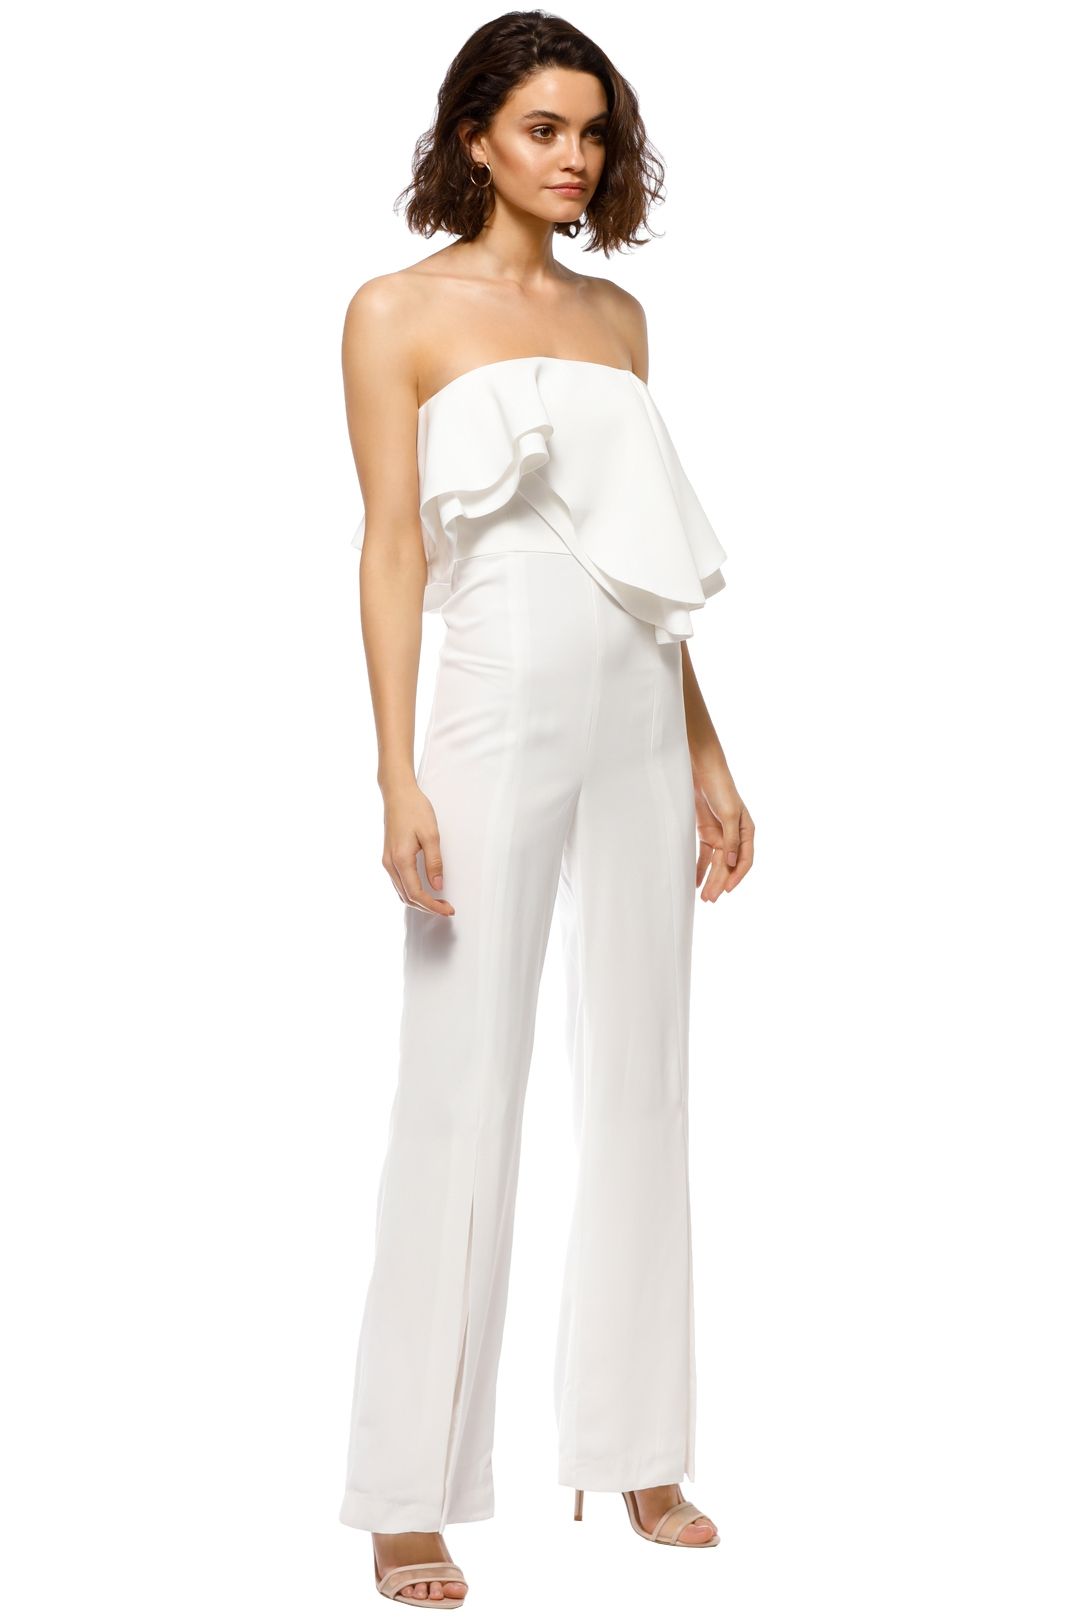 C_MEO - With You Jumpsuit - White - Side